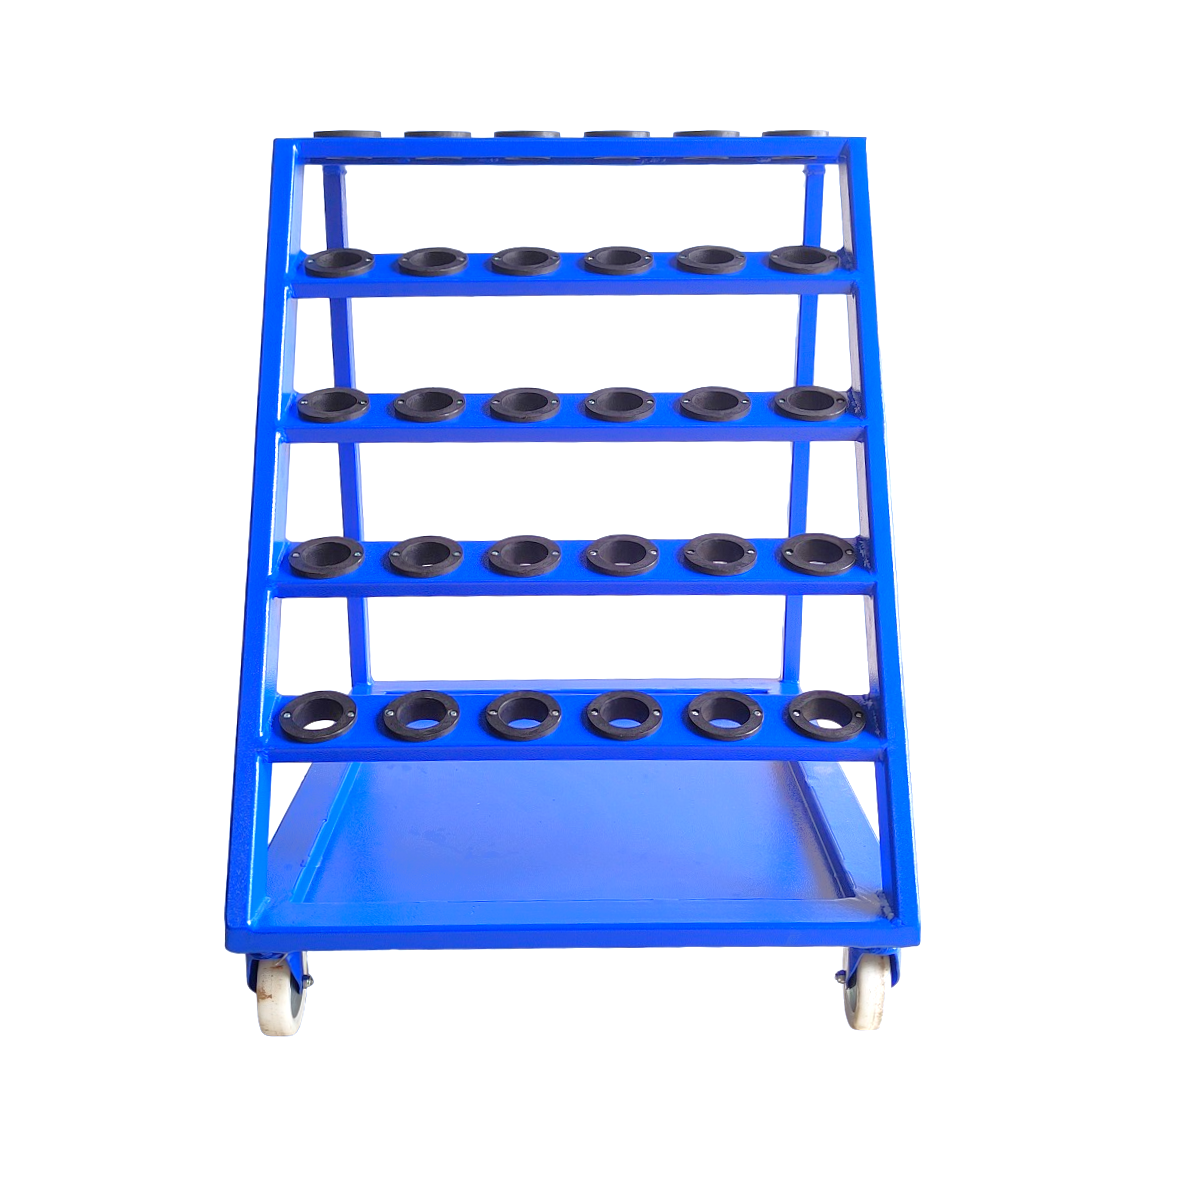 Technocart Tool Holder Trolley for HSK-63 with 5 Racks & 30 Pockets